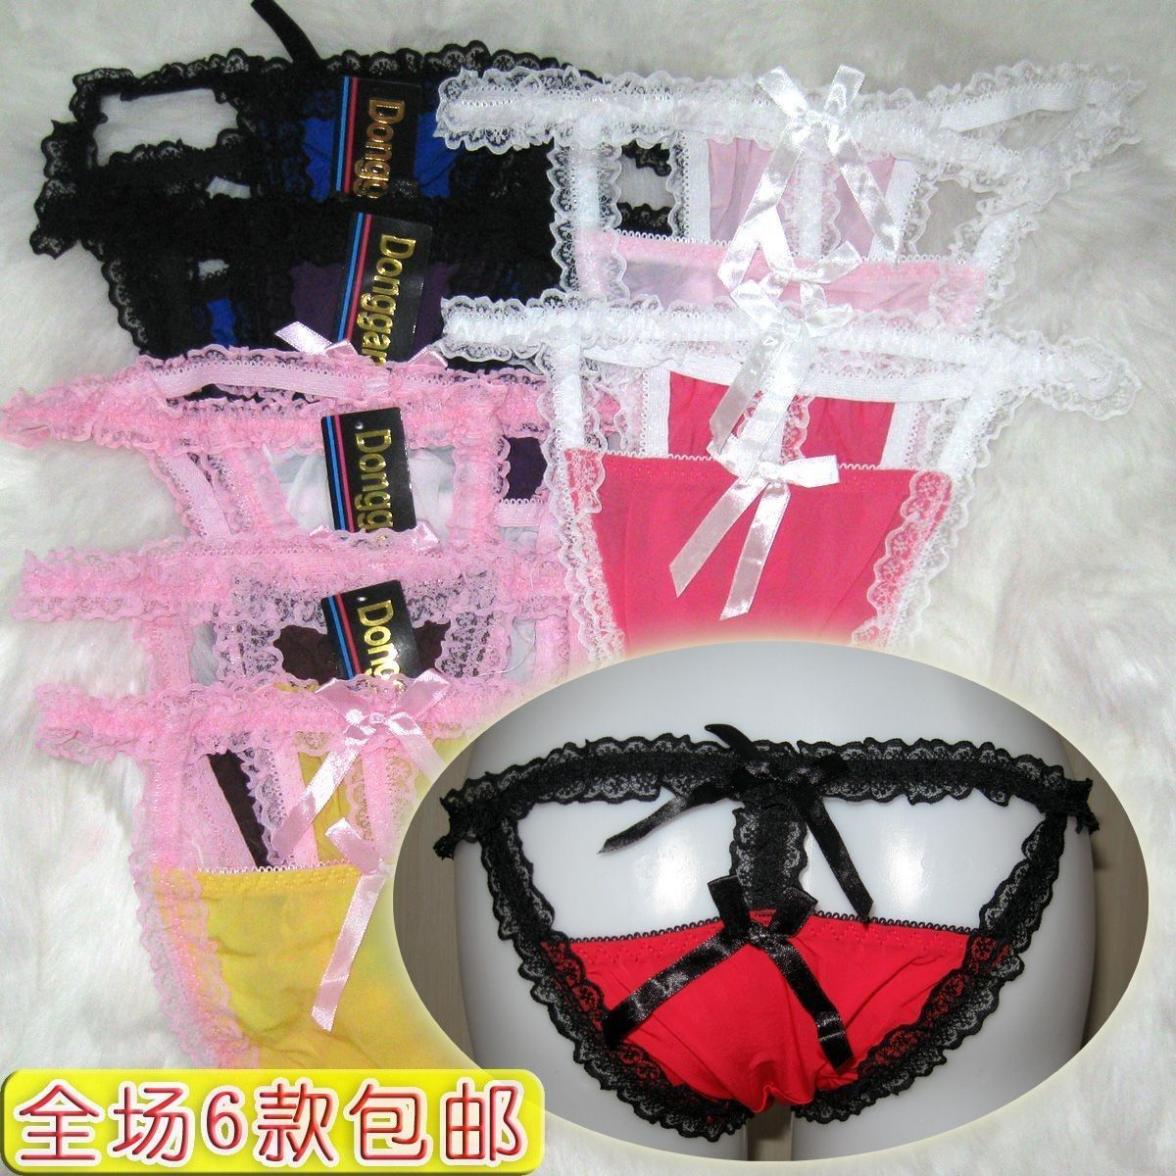 0852 # hollow out low waist dress cute and sexy lace briefs ladies underwear